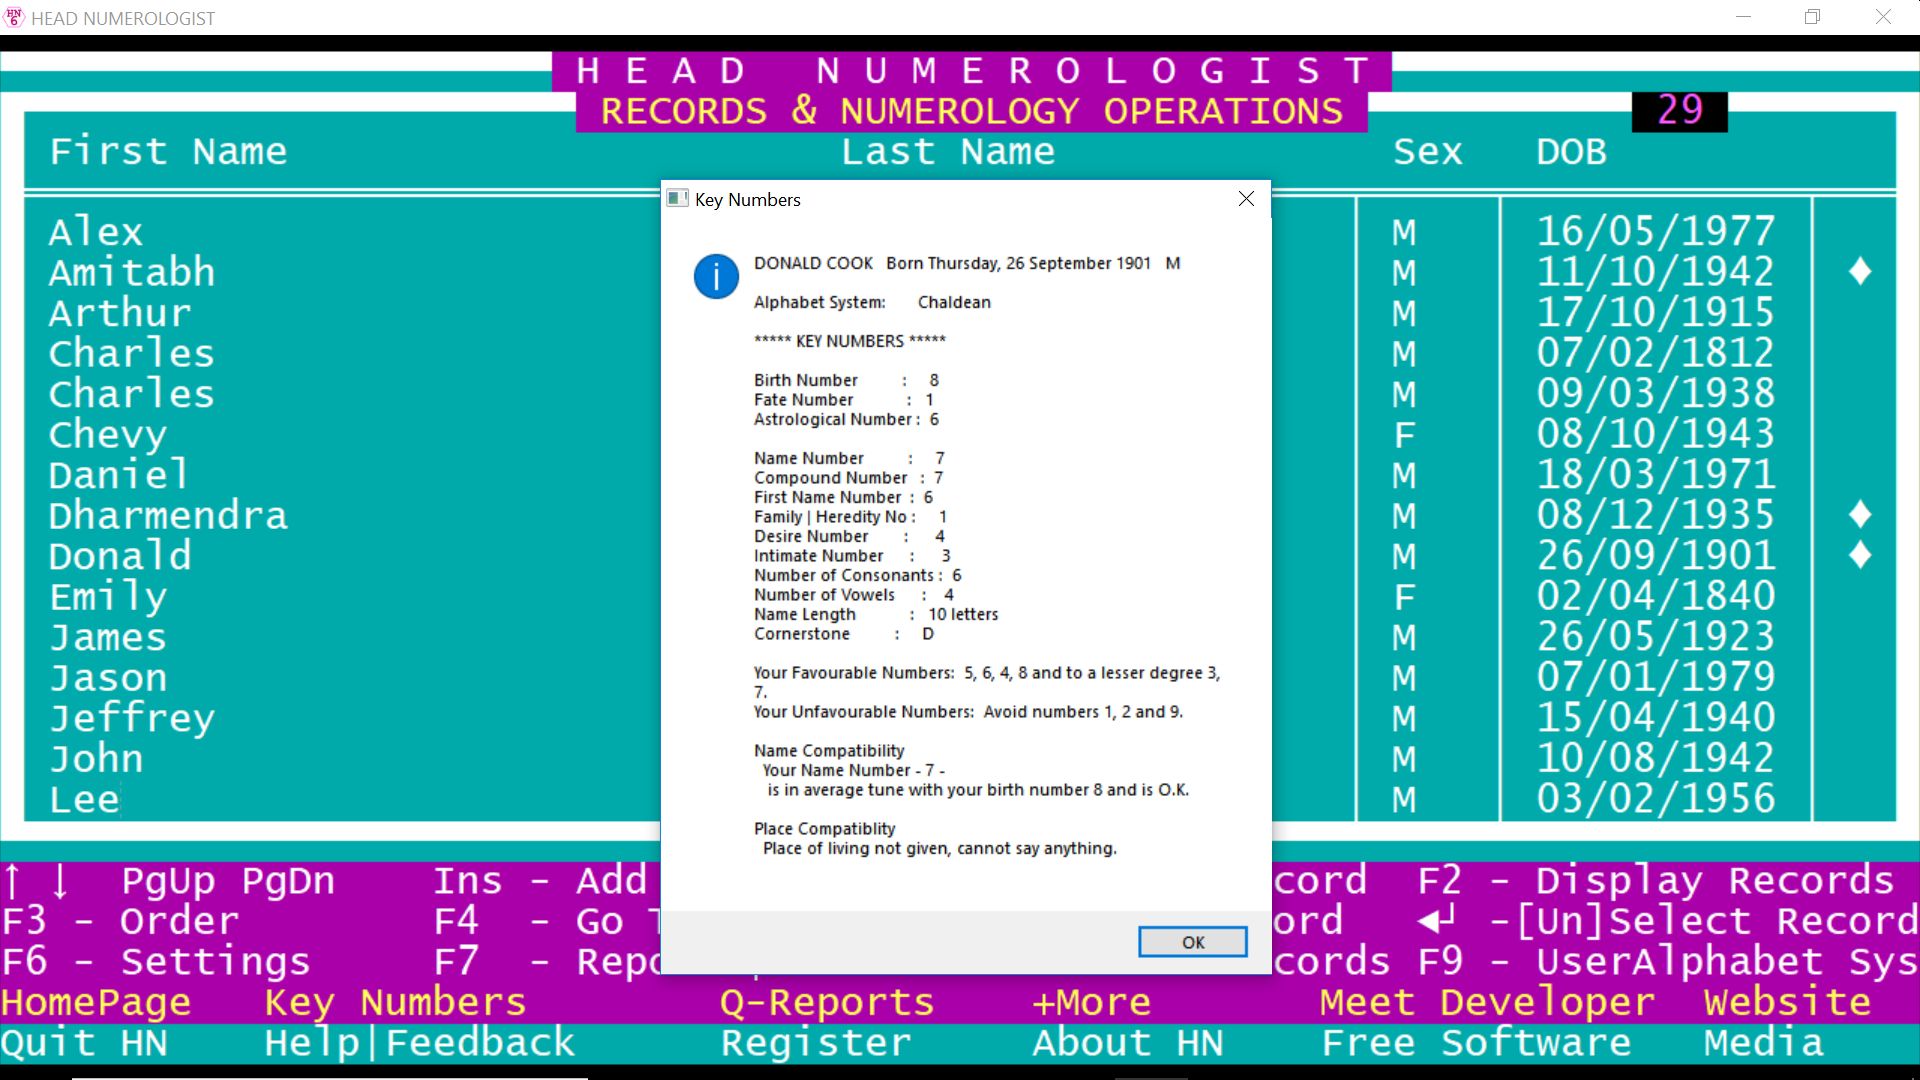 Best Free professional numerology software Head Numerologist. Download Right Now!